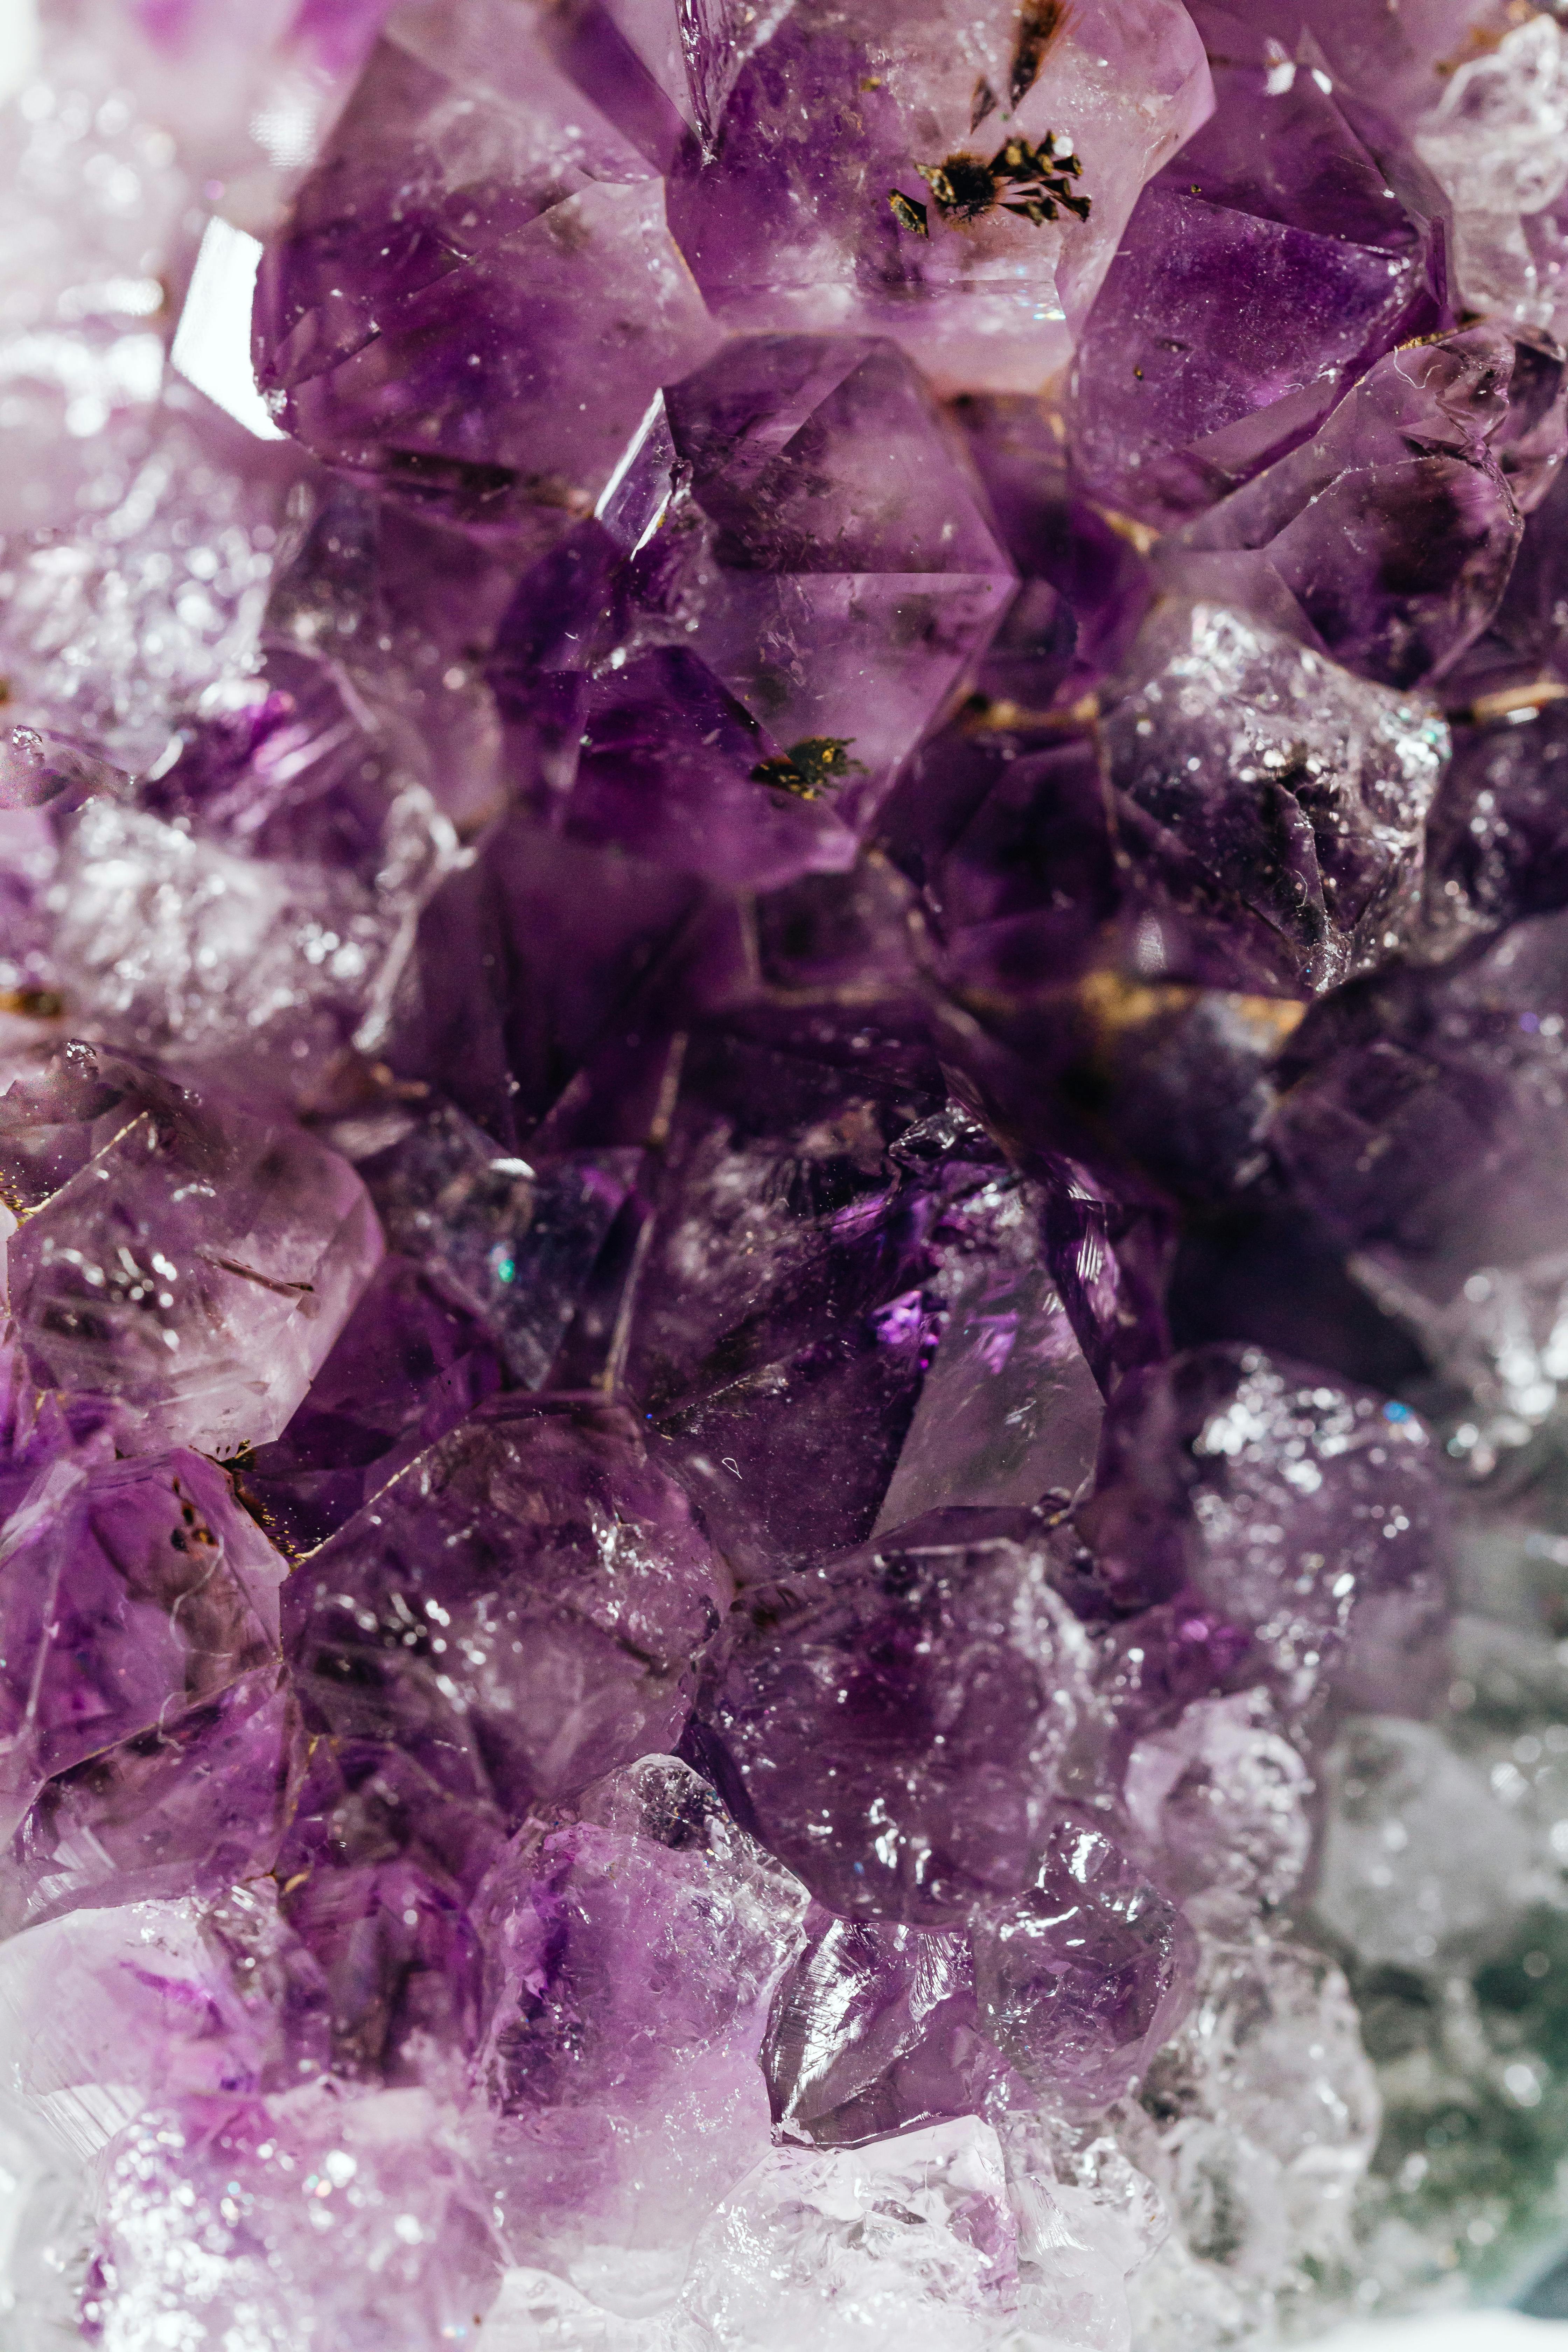 Amethyst Photos Download The BEST Free Amethyst Stock Photos  HD Images